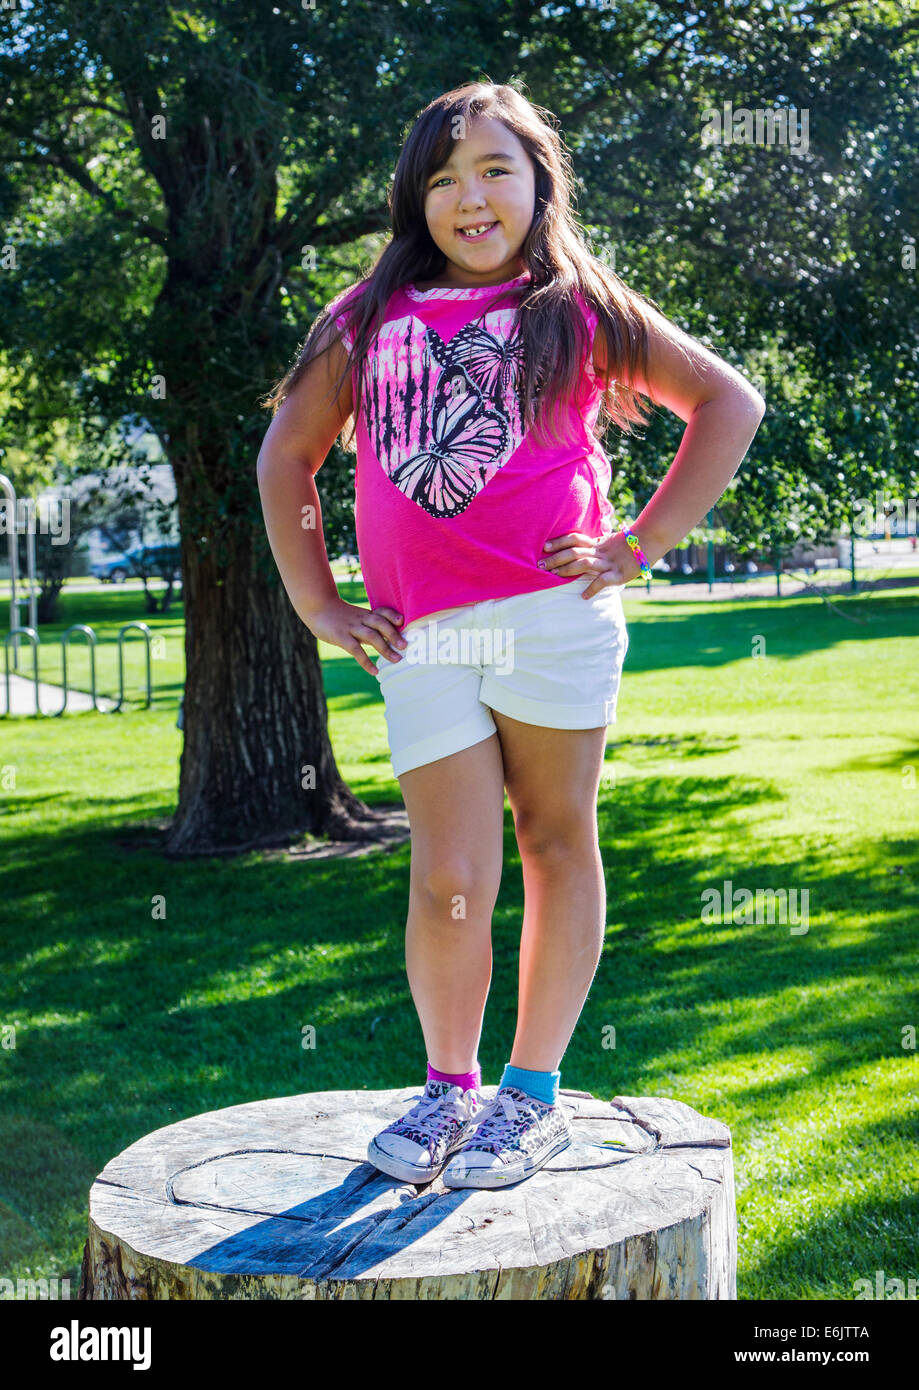 Summer portrait of seven year old girl posing on a large old tree stump in a park Stock Photo